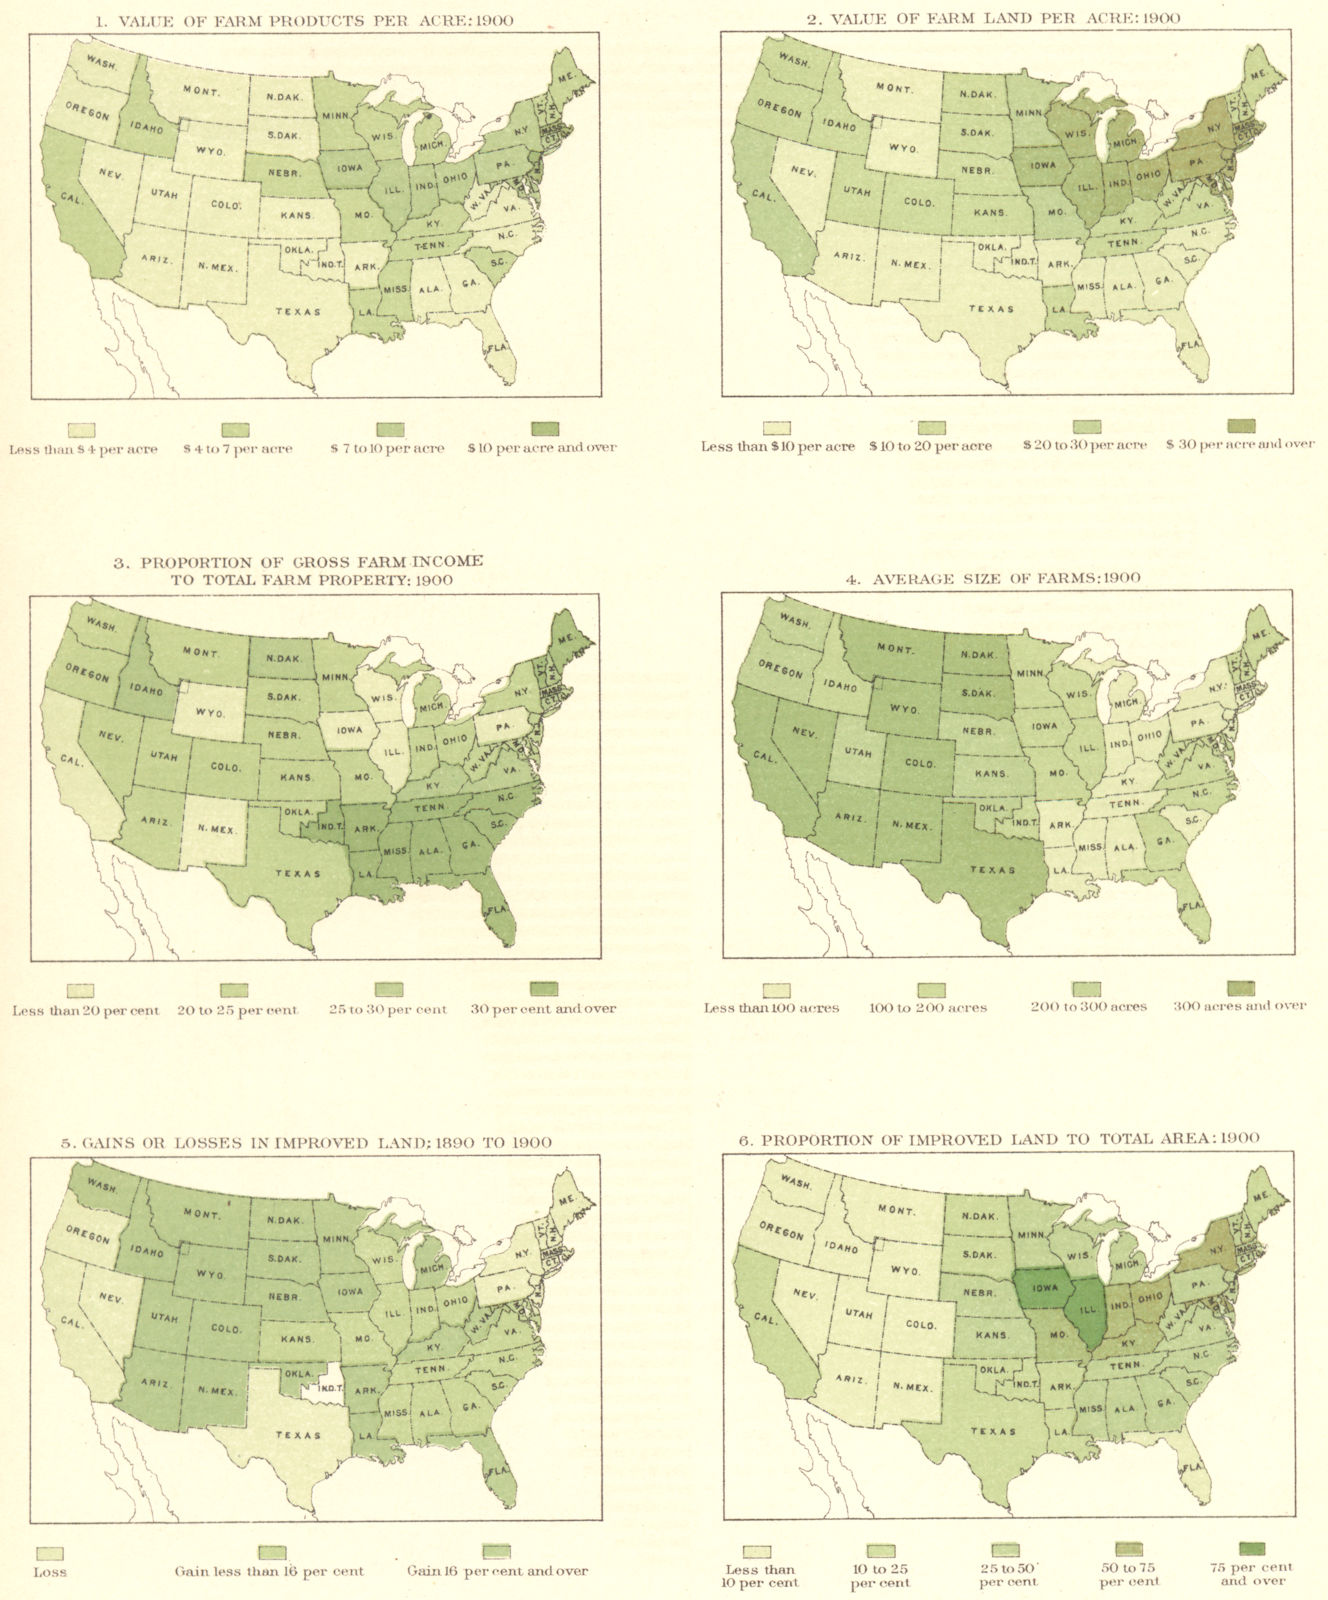 USA. Value Farm products, land / Acre; average size; improved, income 1900 map